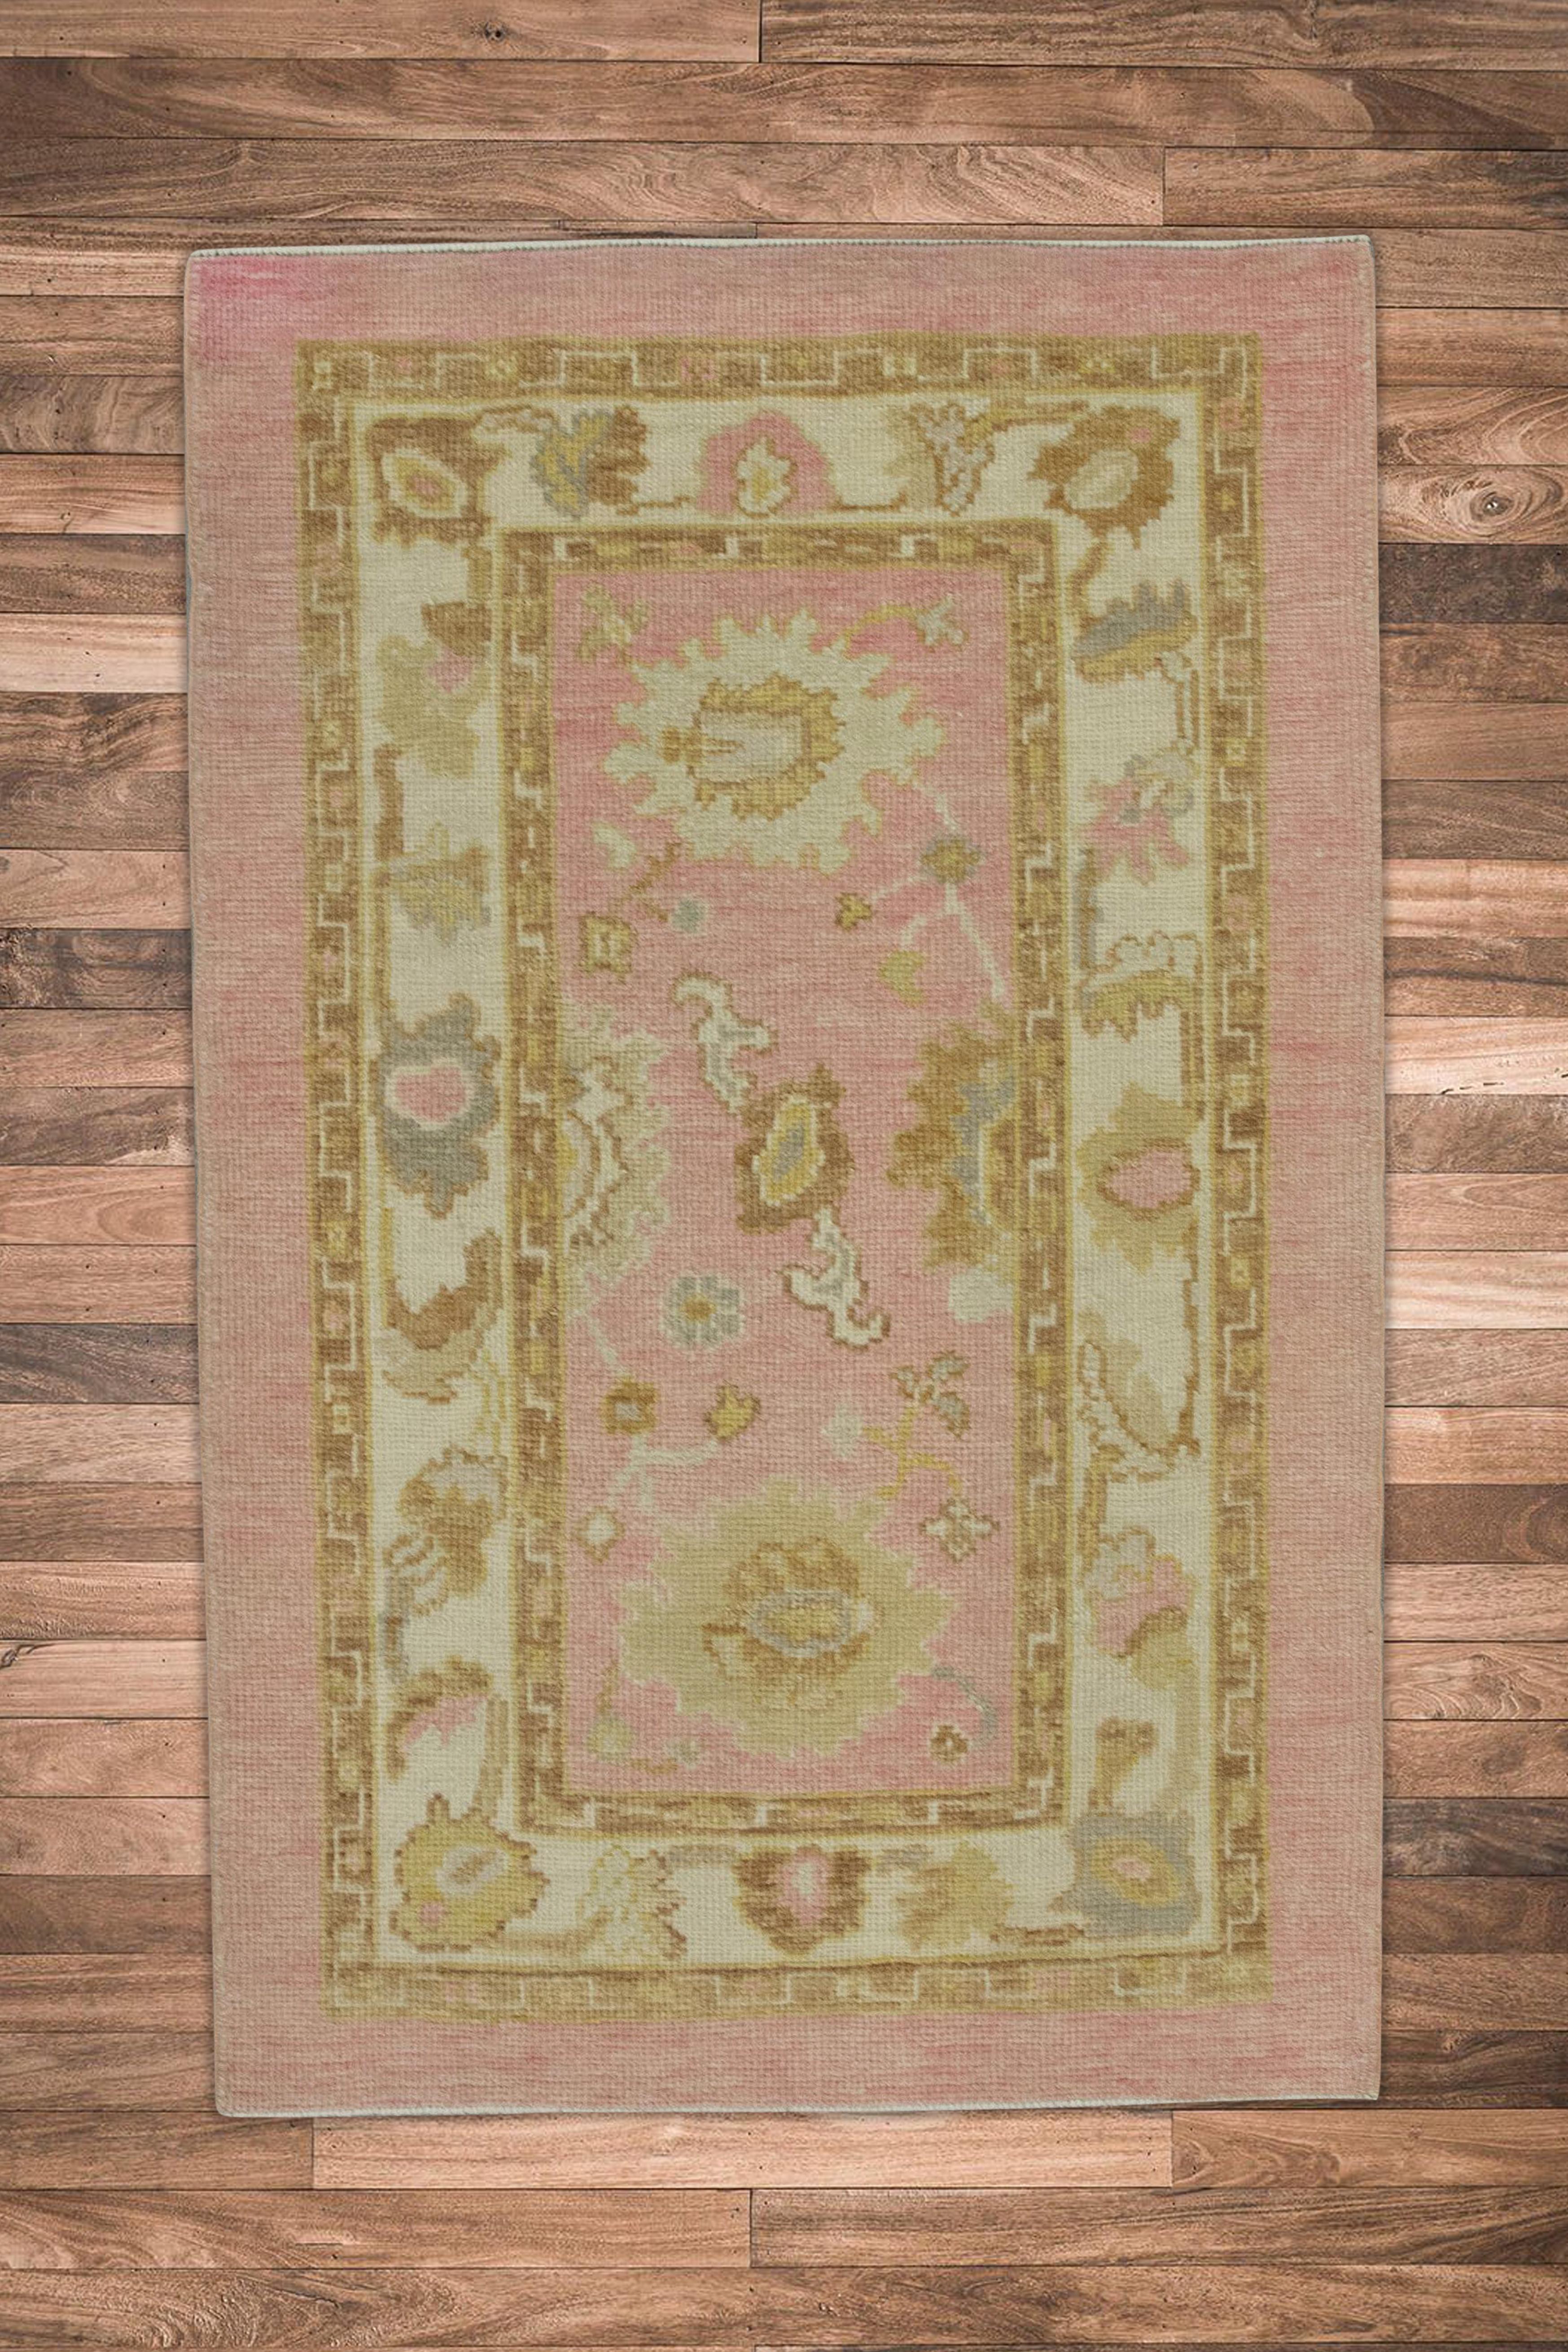 Contemporary Pink & Yellow Floral Design Handwoven Wool Turkish Oushak Rug 3' x 4'6